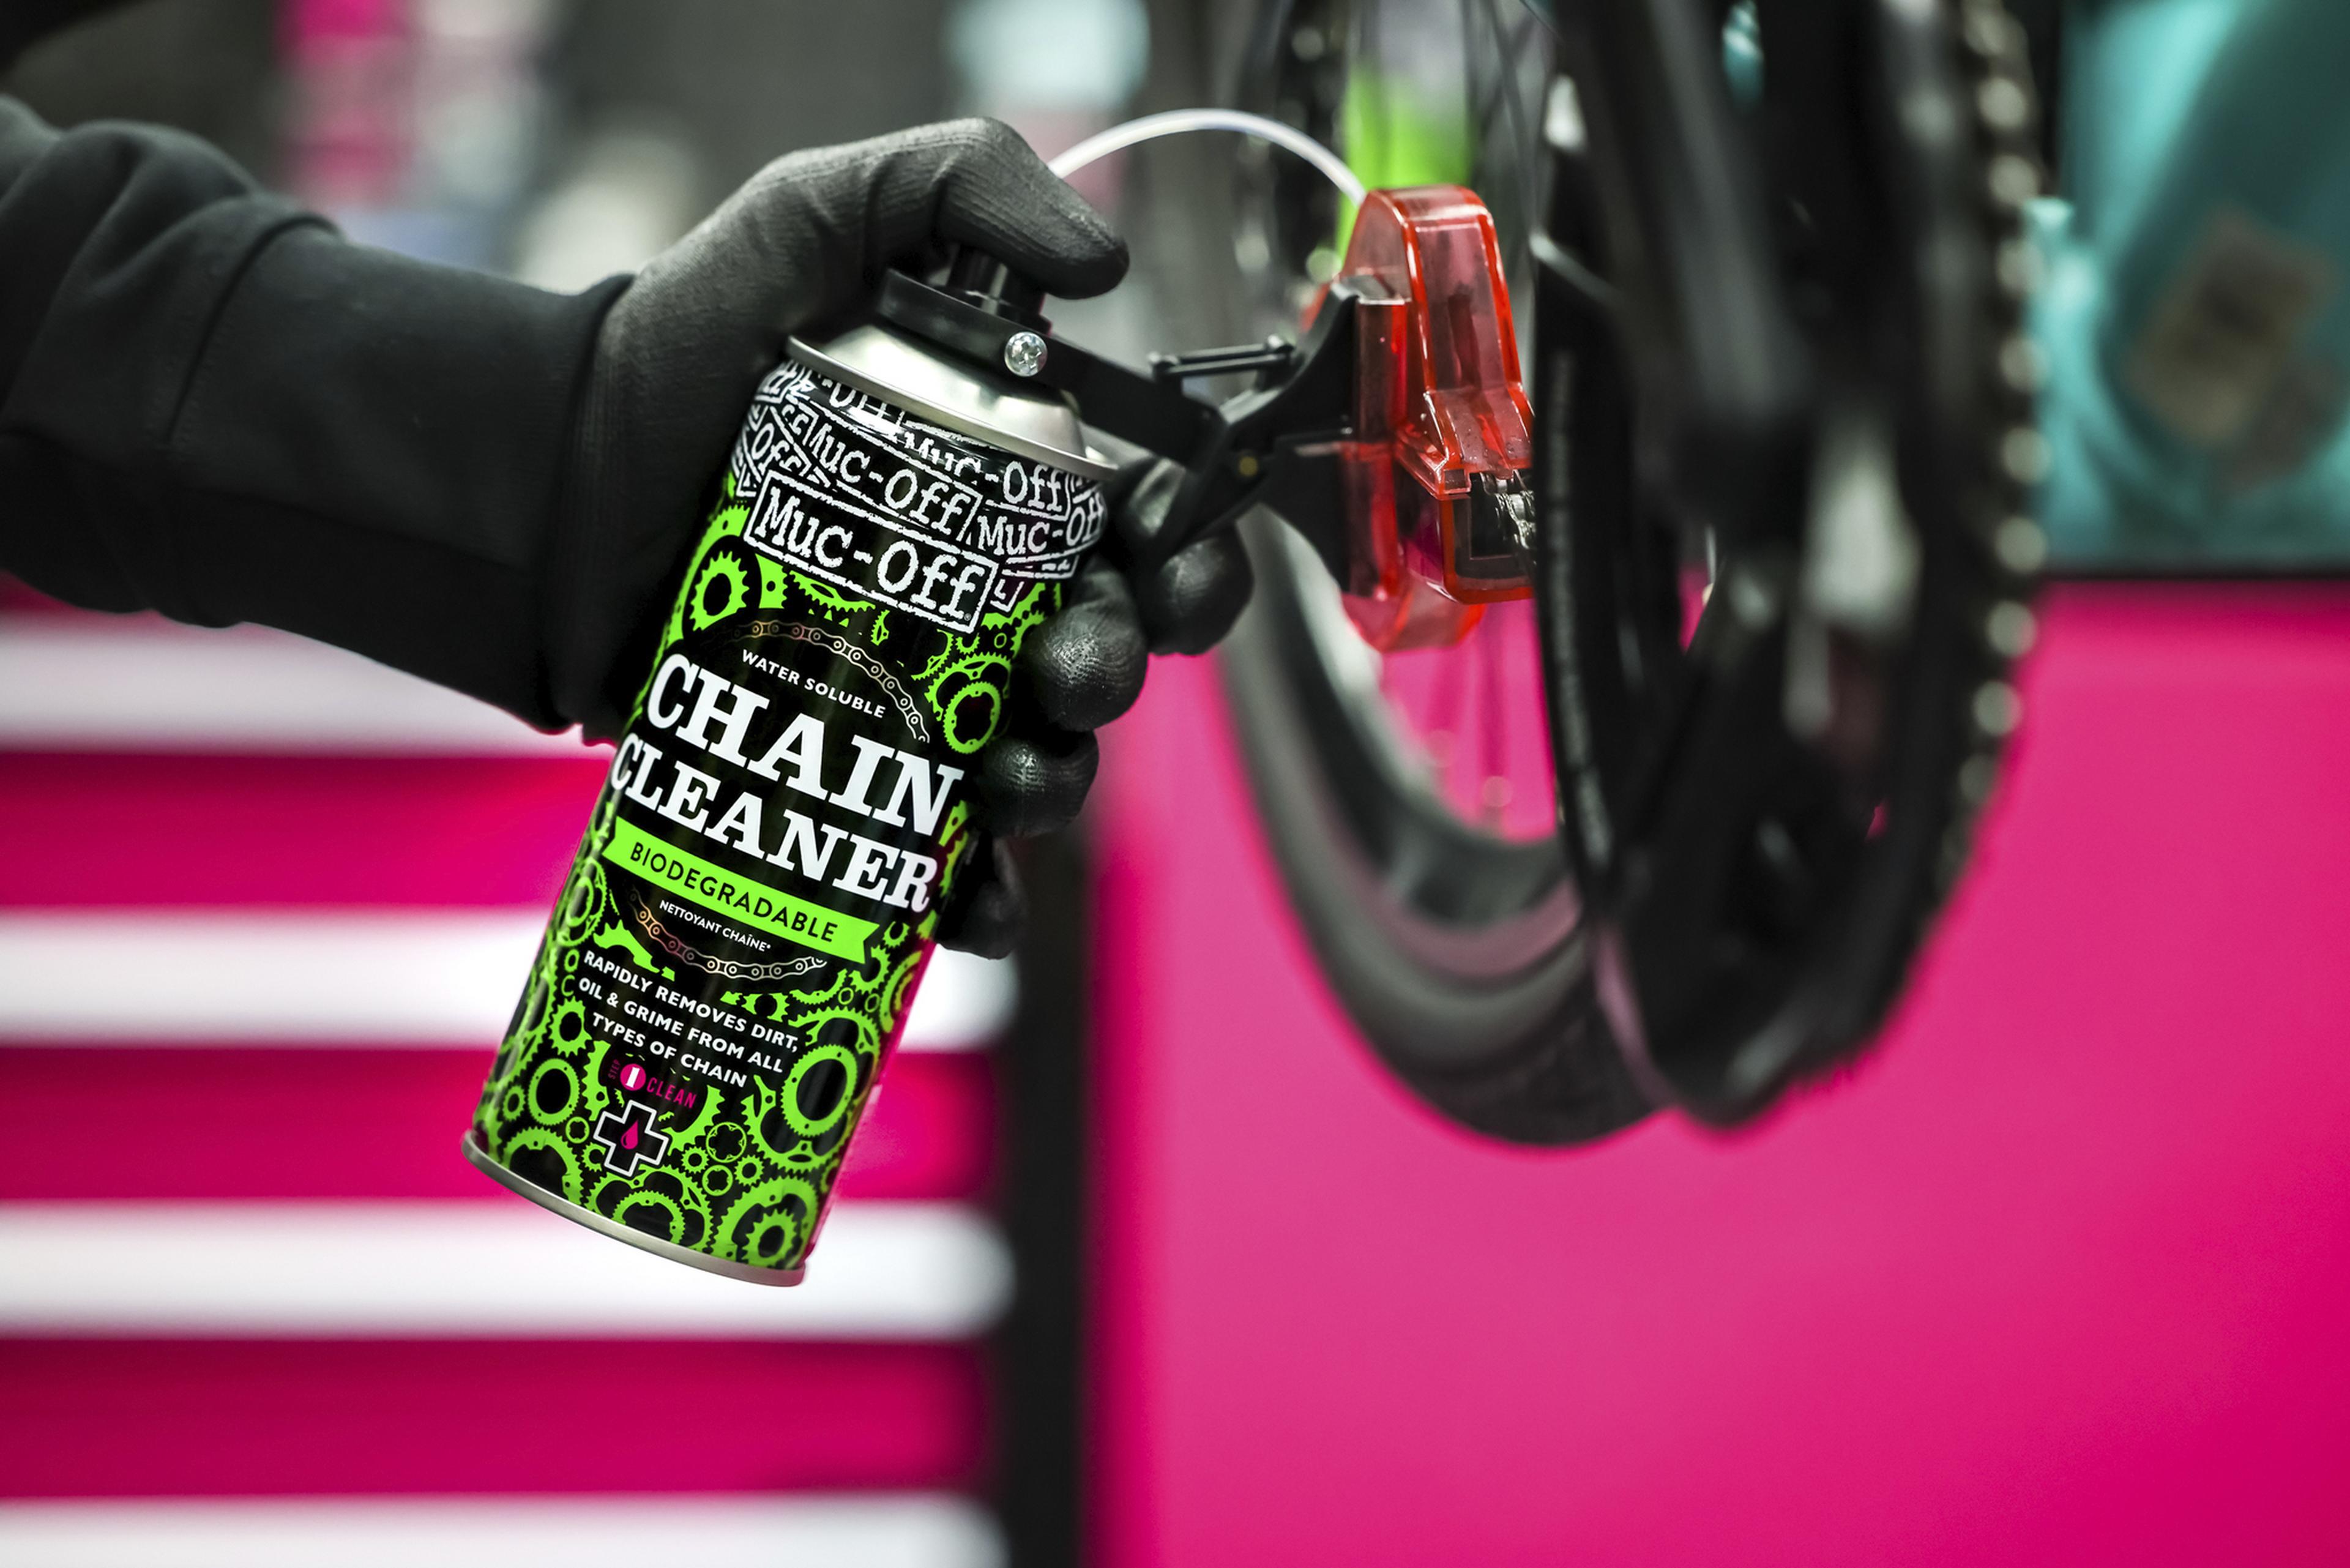 Muc-Off Chain Cleaning Device Chain Doc with Chain Cleaner Liquid